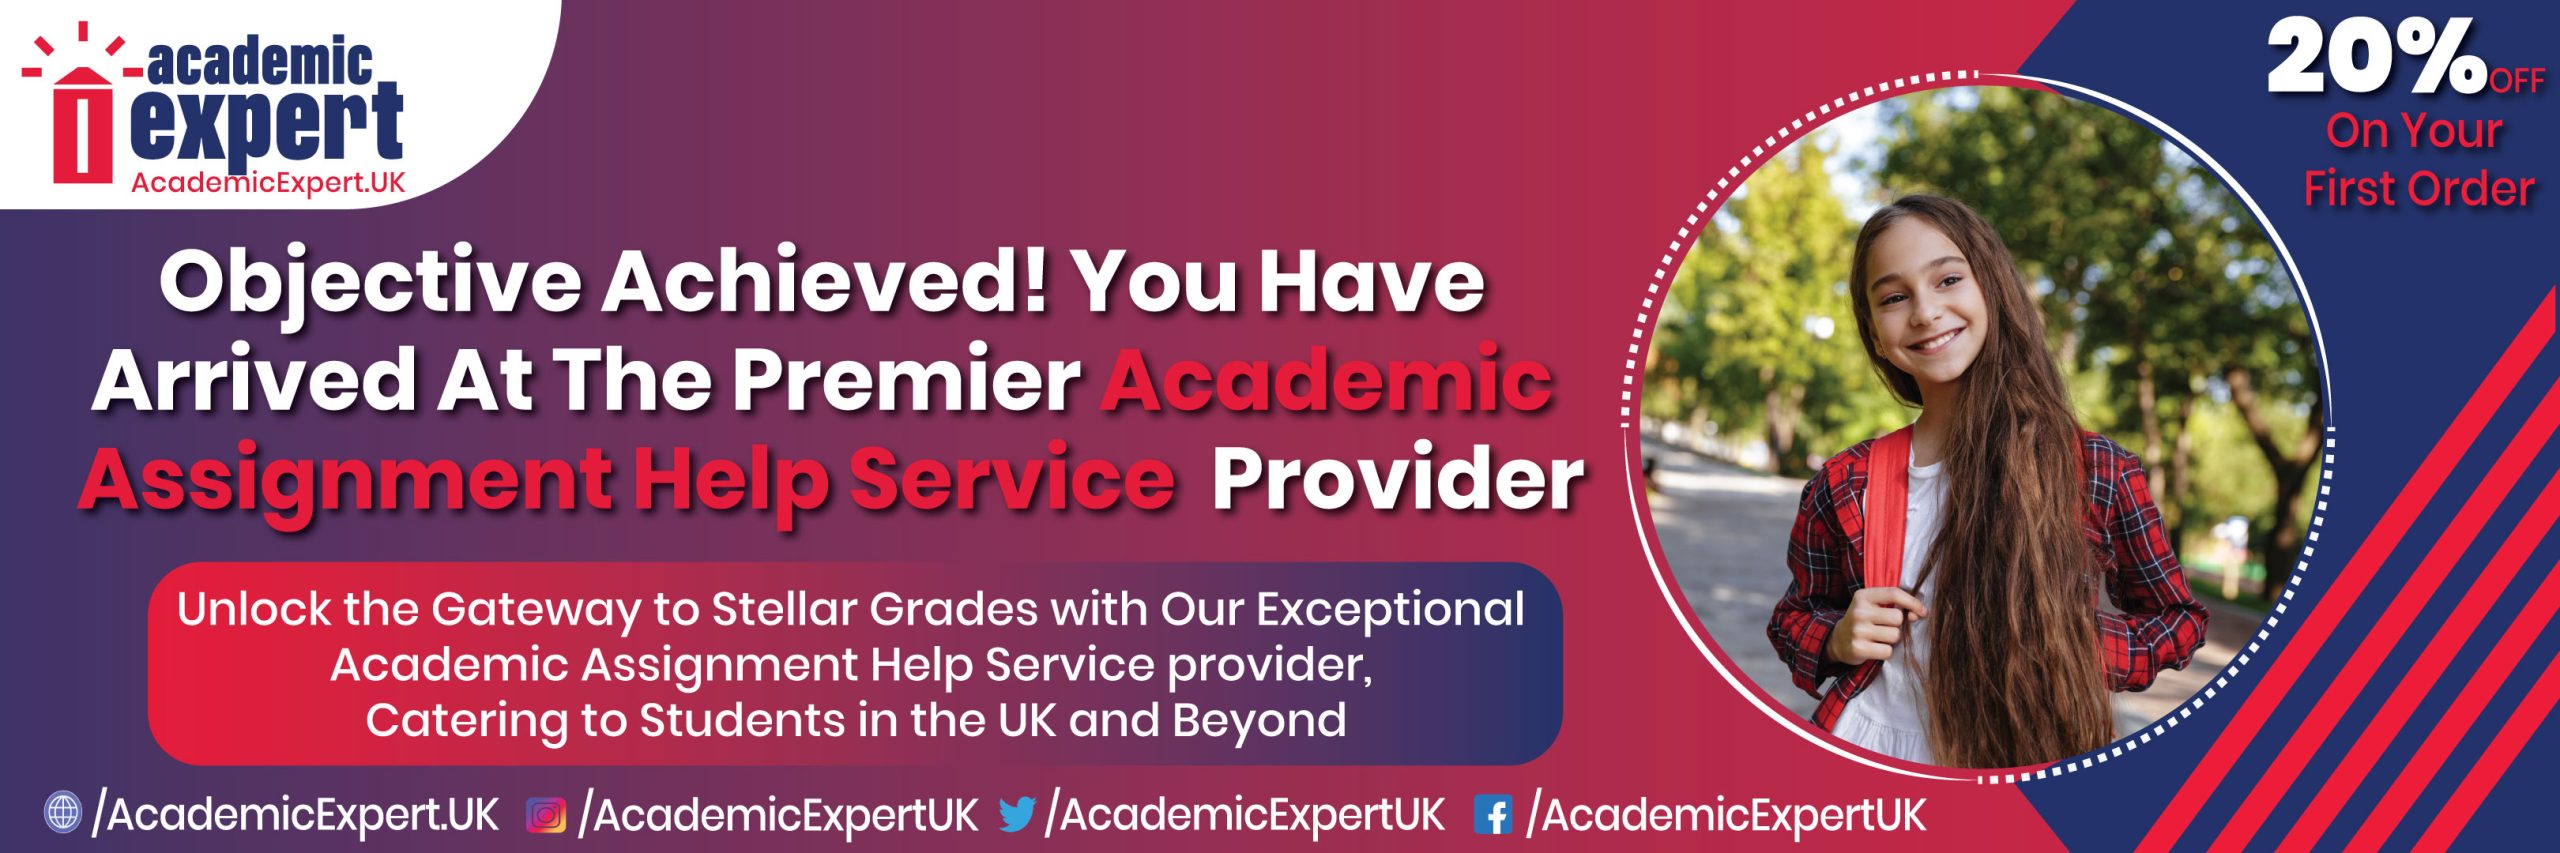 OBJECTIVE ACHIEVED! YOU HAVE ARRIVED AT THE PREMIER ACADEMIC ASSIGNMENT HELP SERVICE PROVIDER